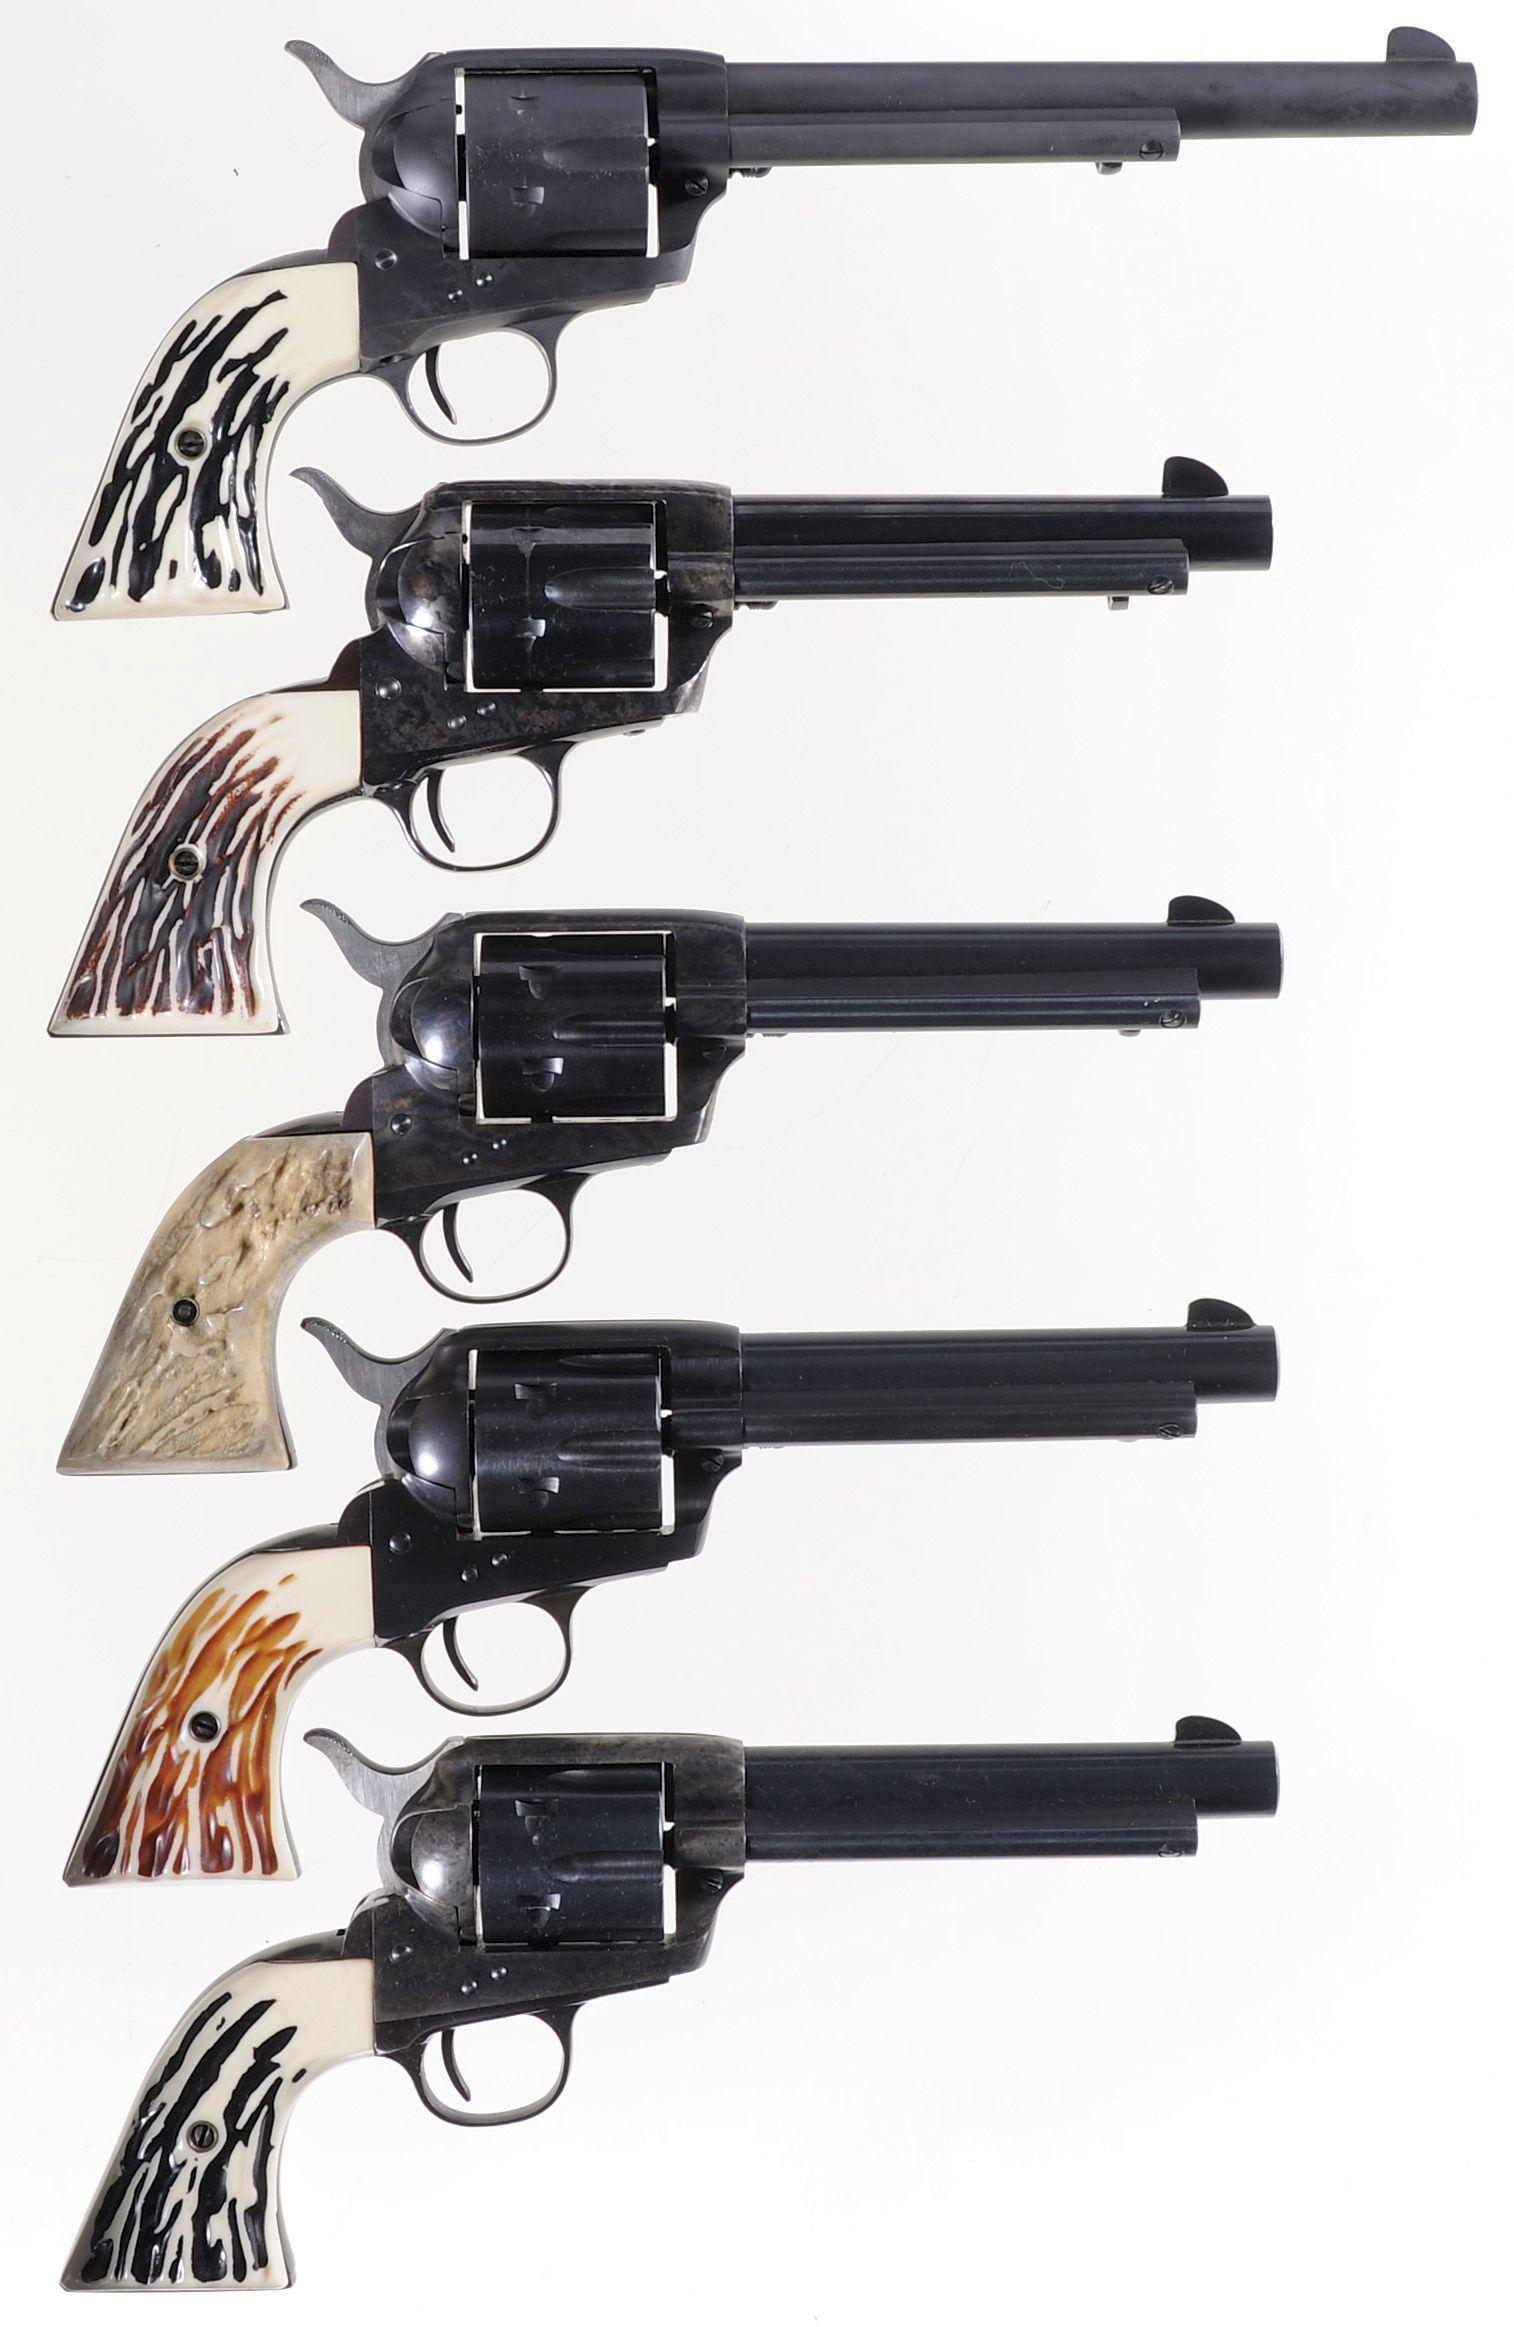 Five Great Western Arms Co. Single Action Revolvers